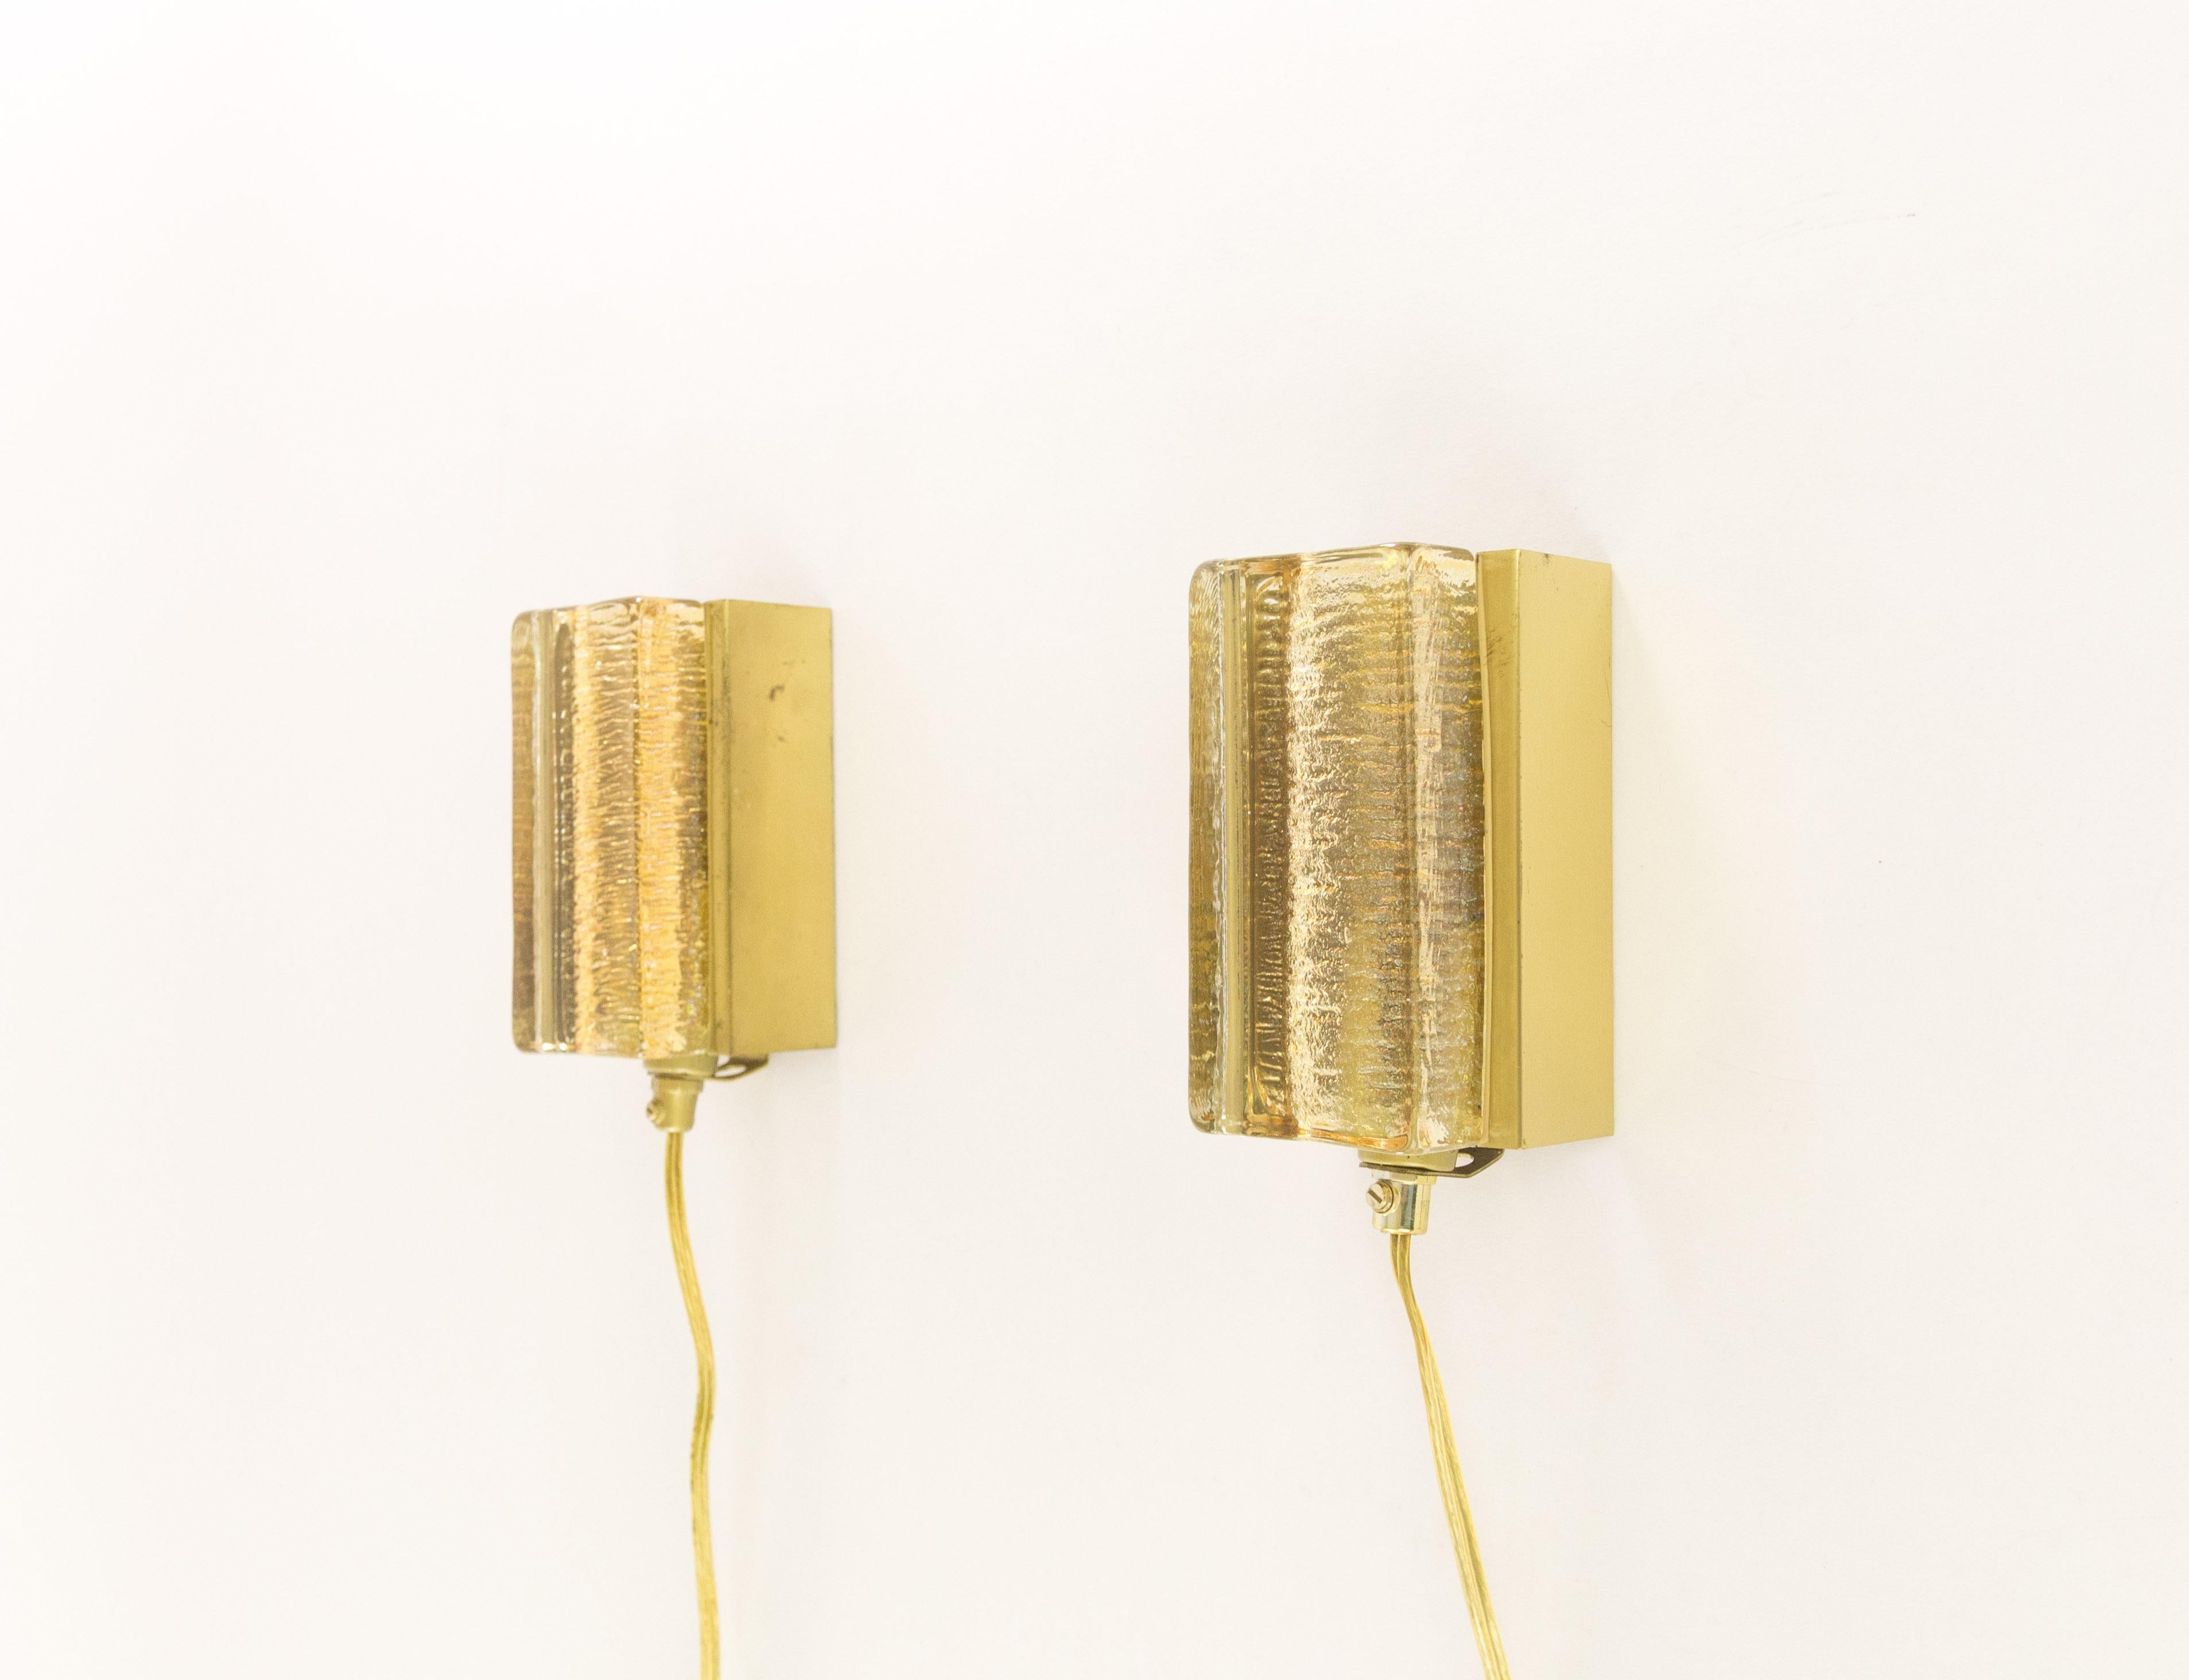 Danish Pair of Atlantic Wall Lamps by Vitrika in Gold, 1970s For Sale